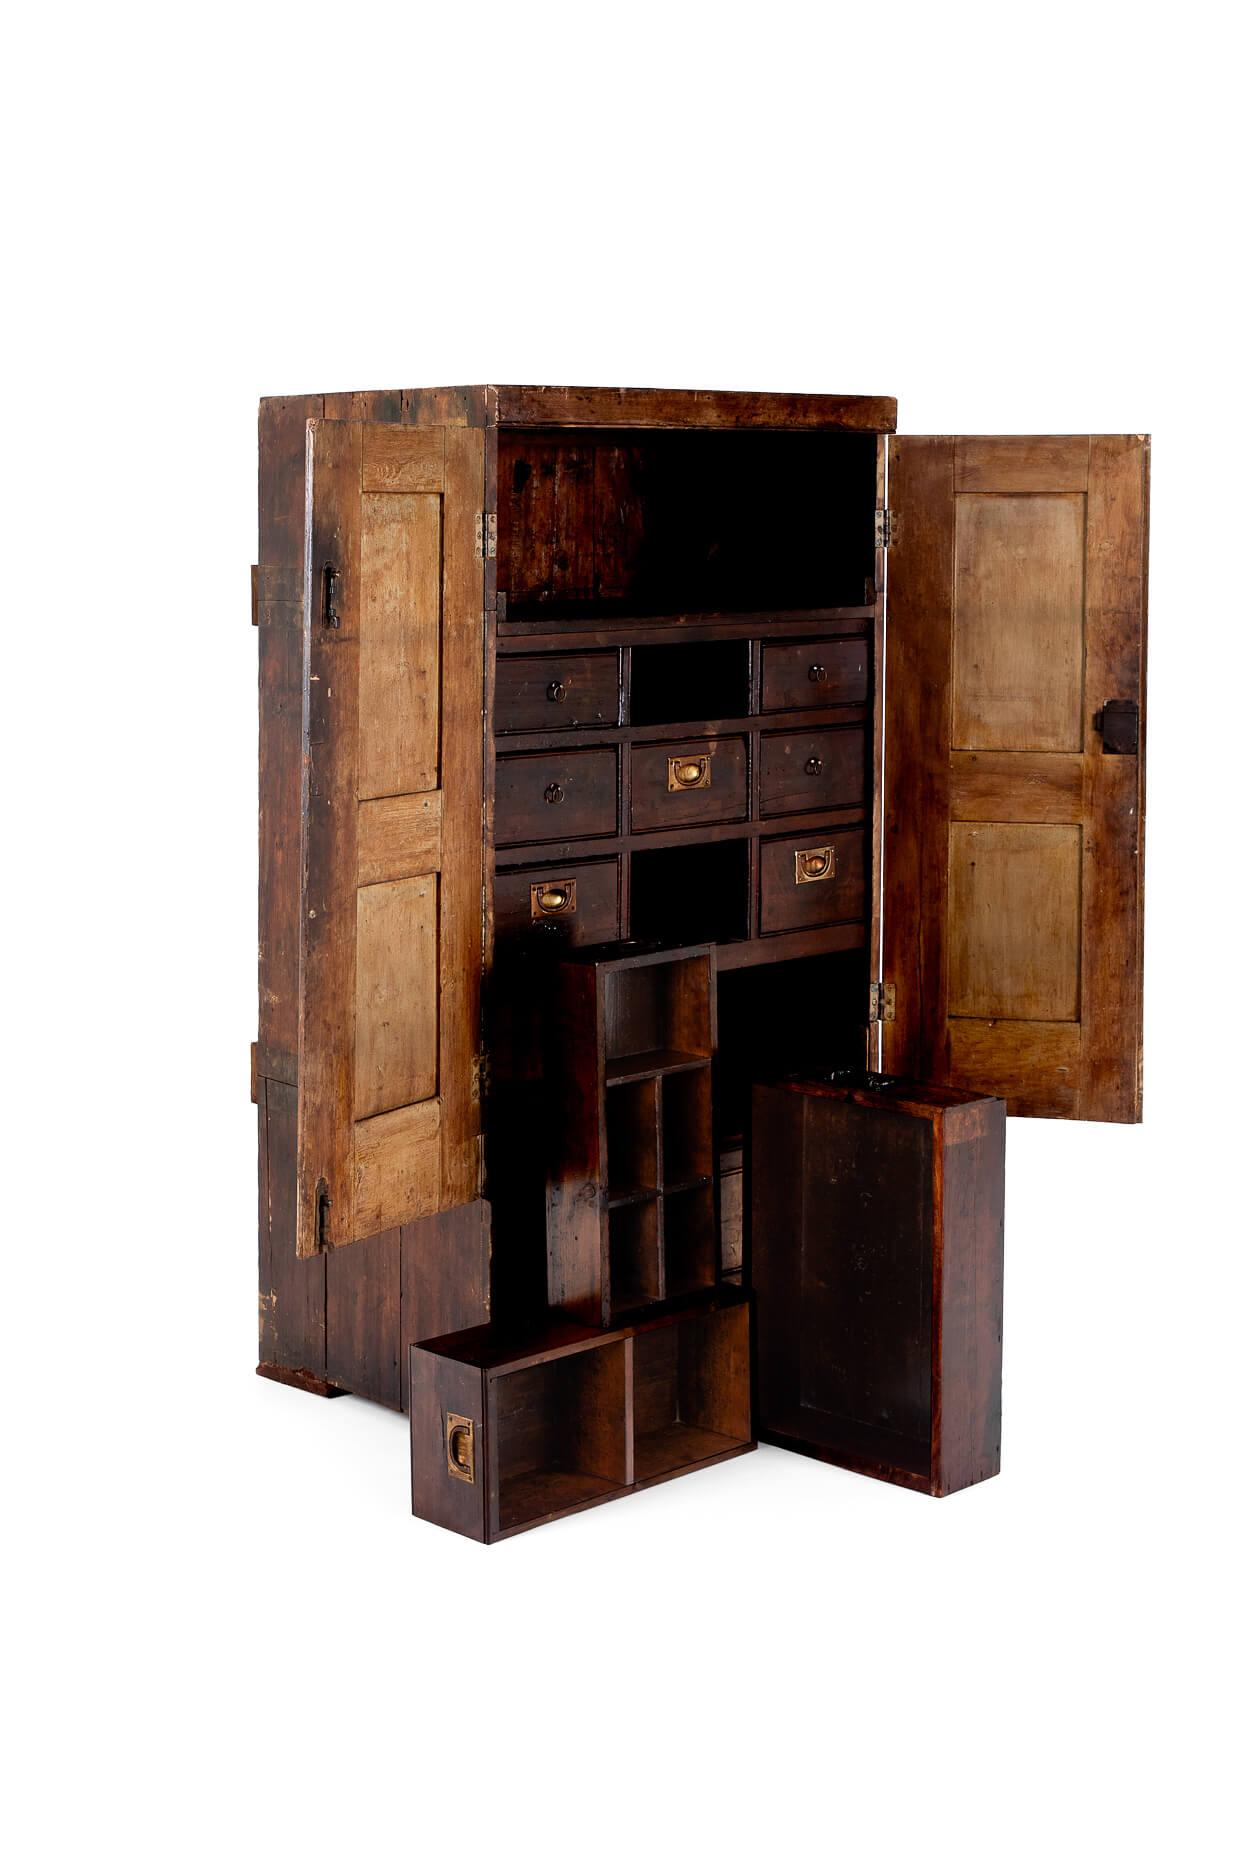 High Victorian Victorian Watchmakers Cupboard For Sale